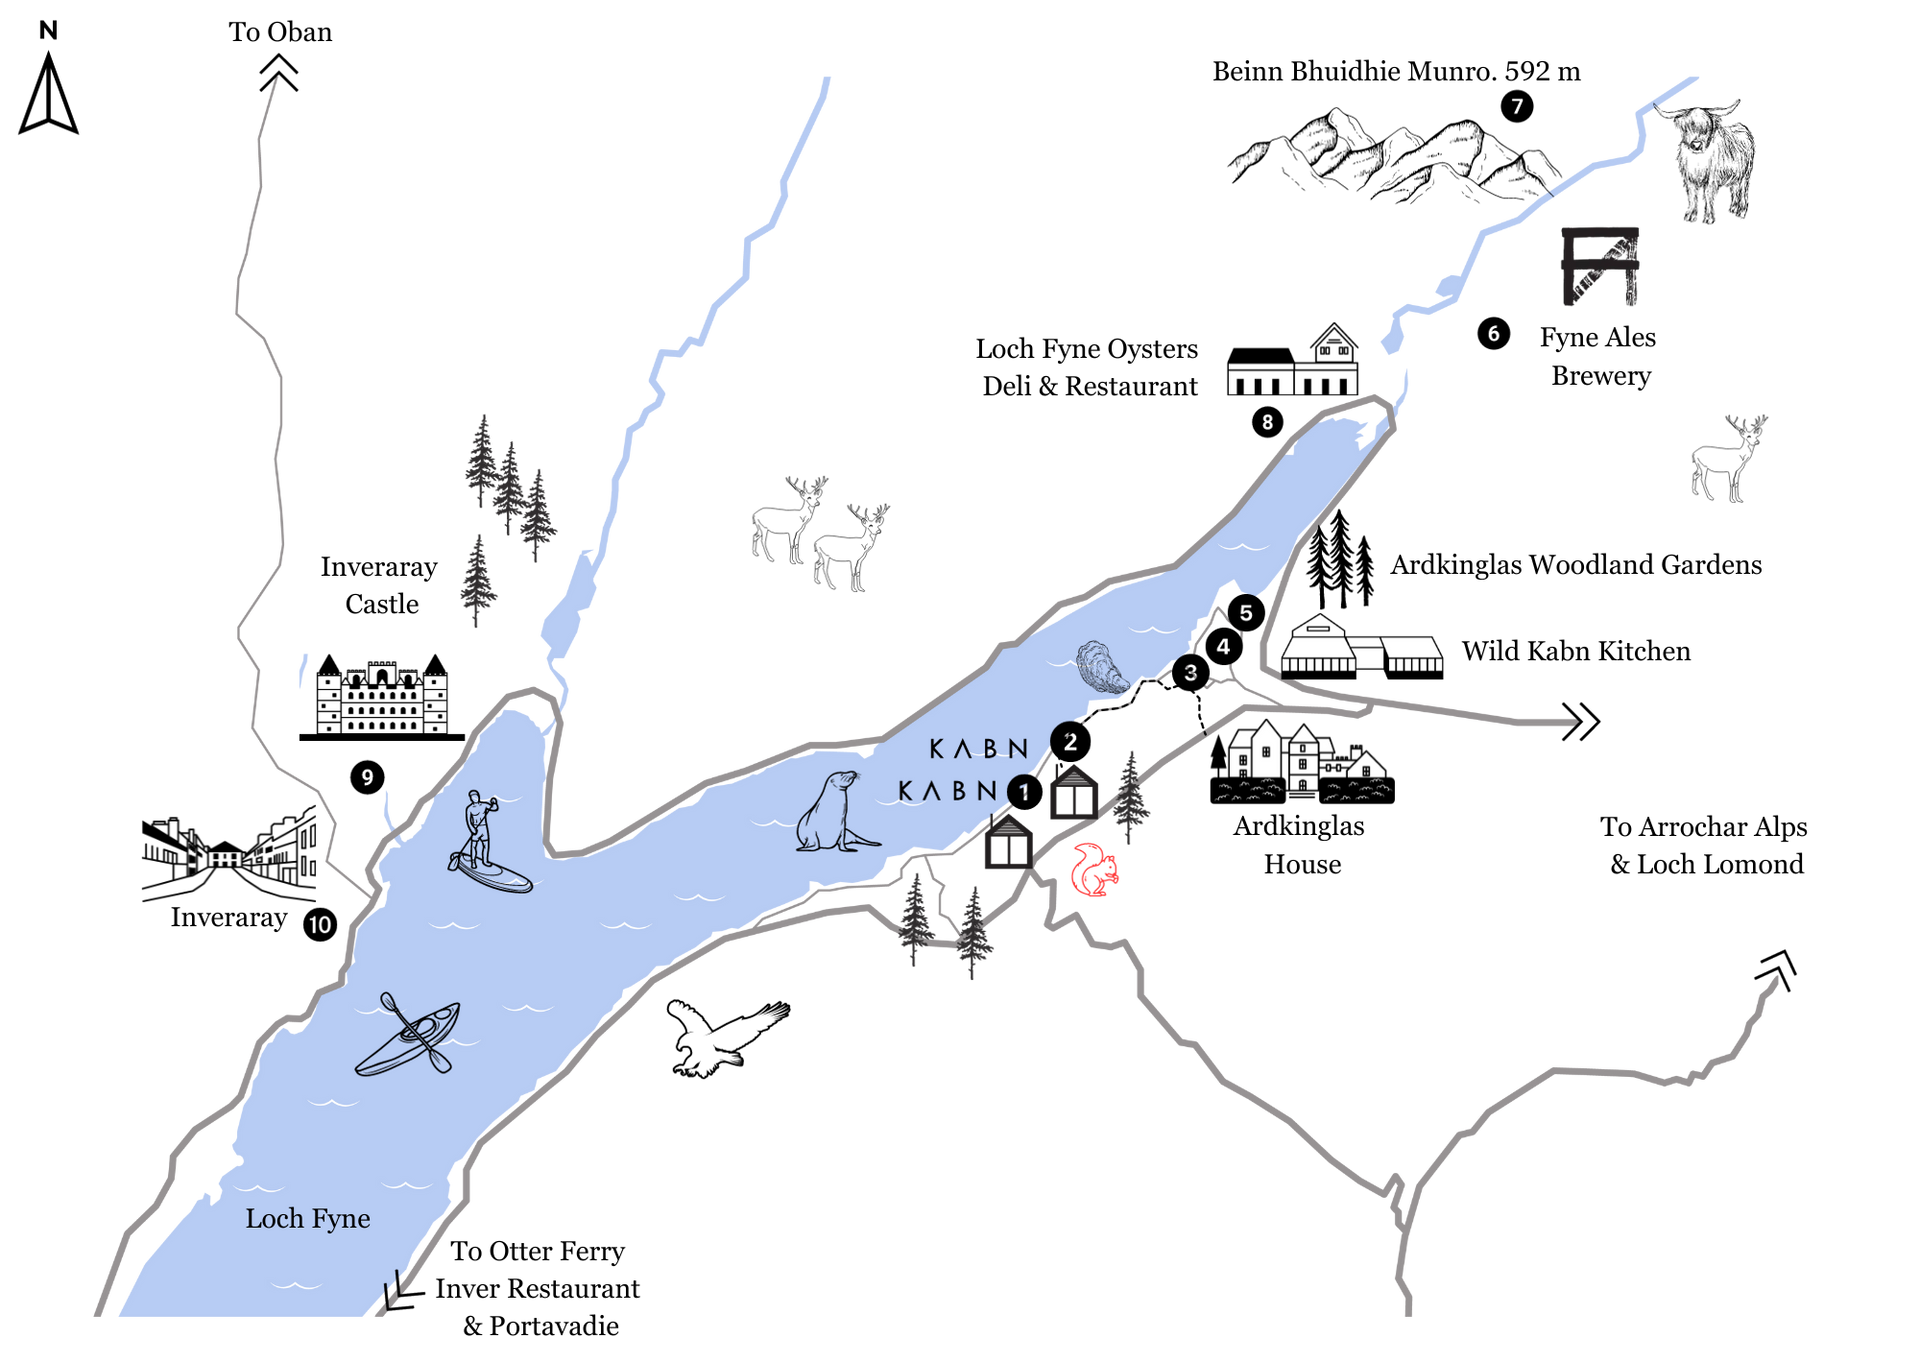 Map of kabn company in relation to loch fyne.